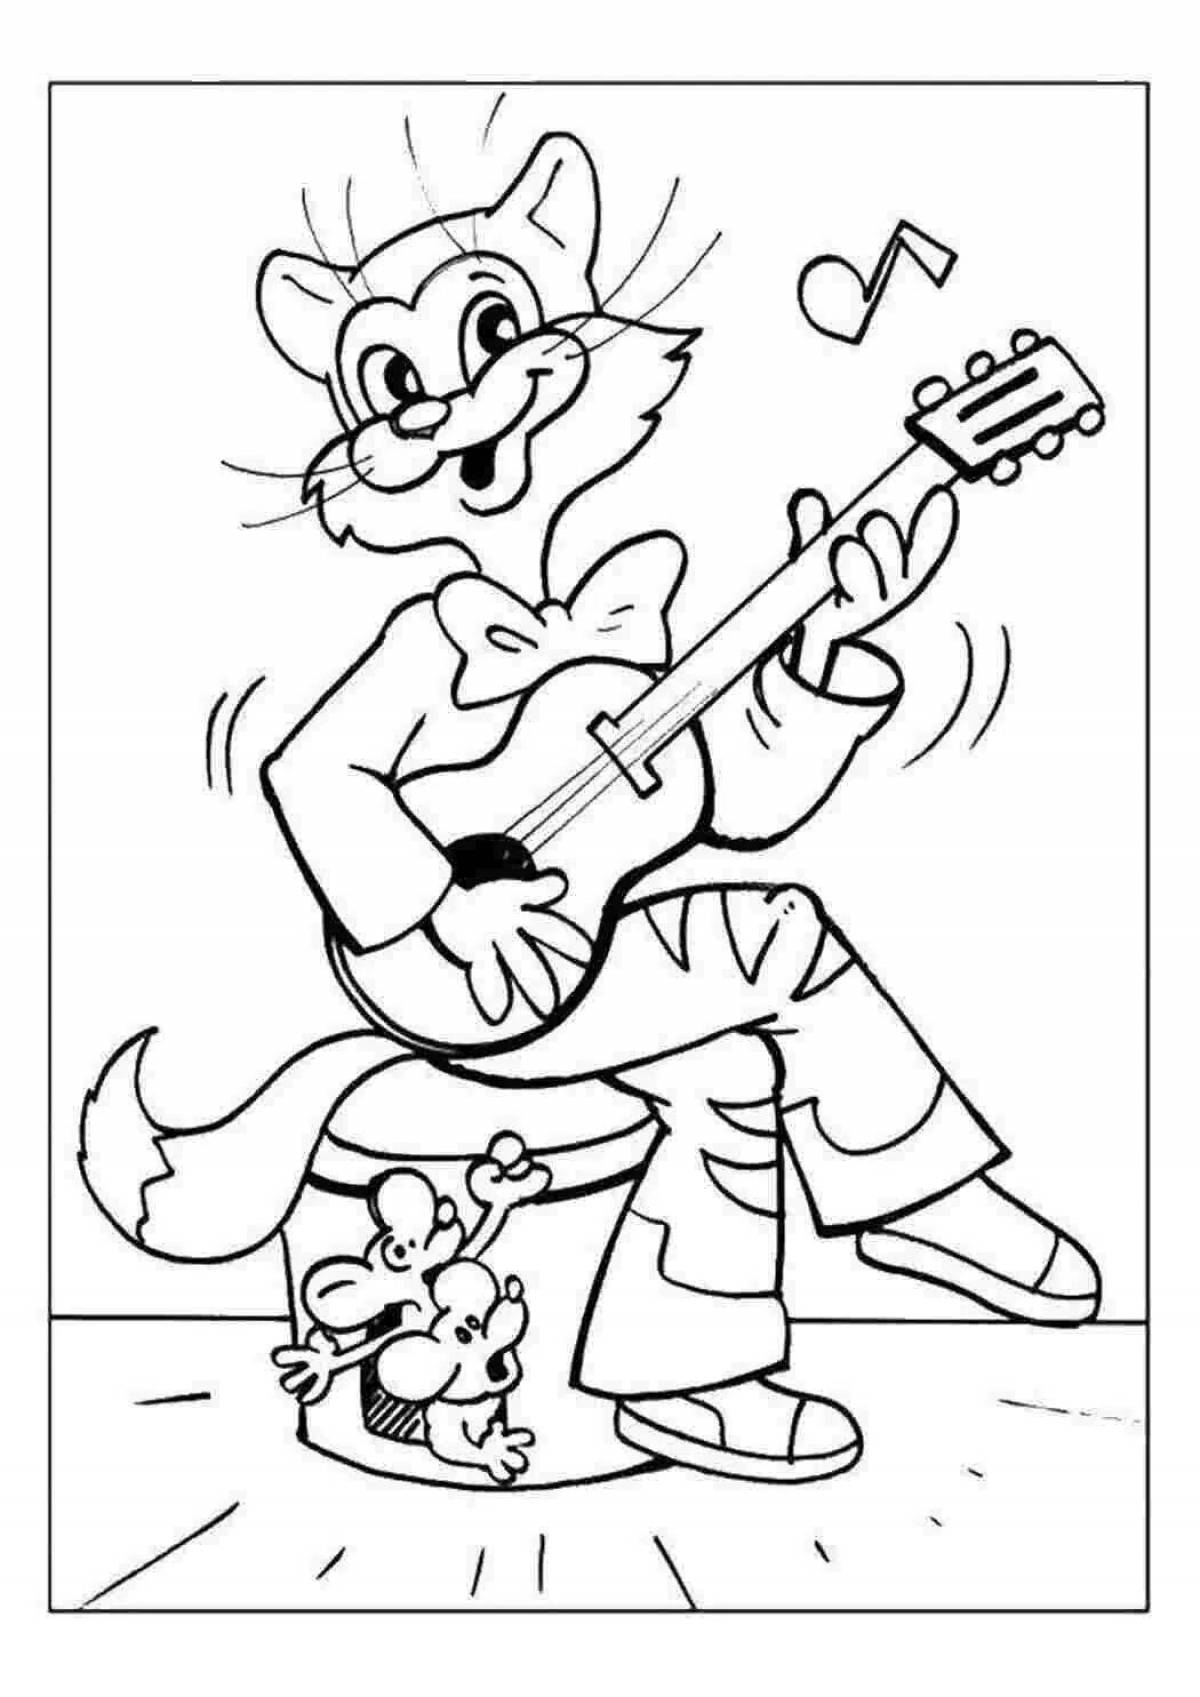 Charming leopold cat coloring book